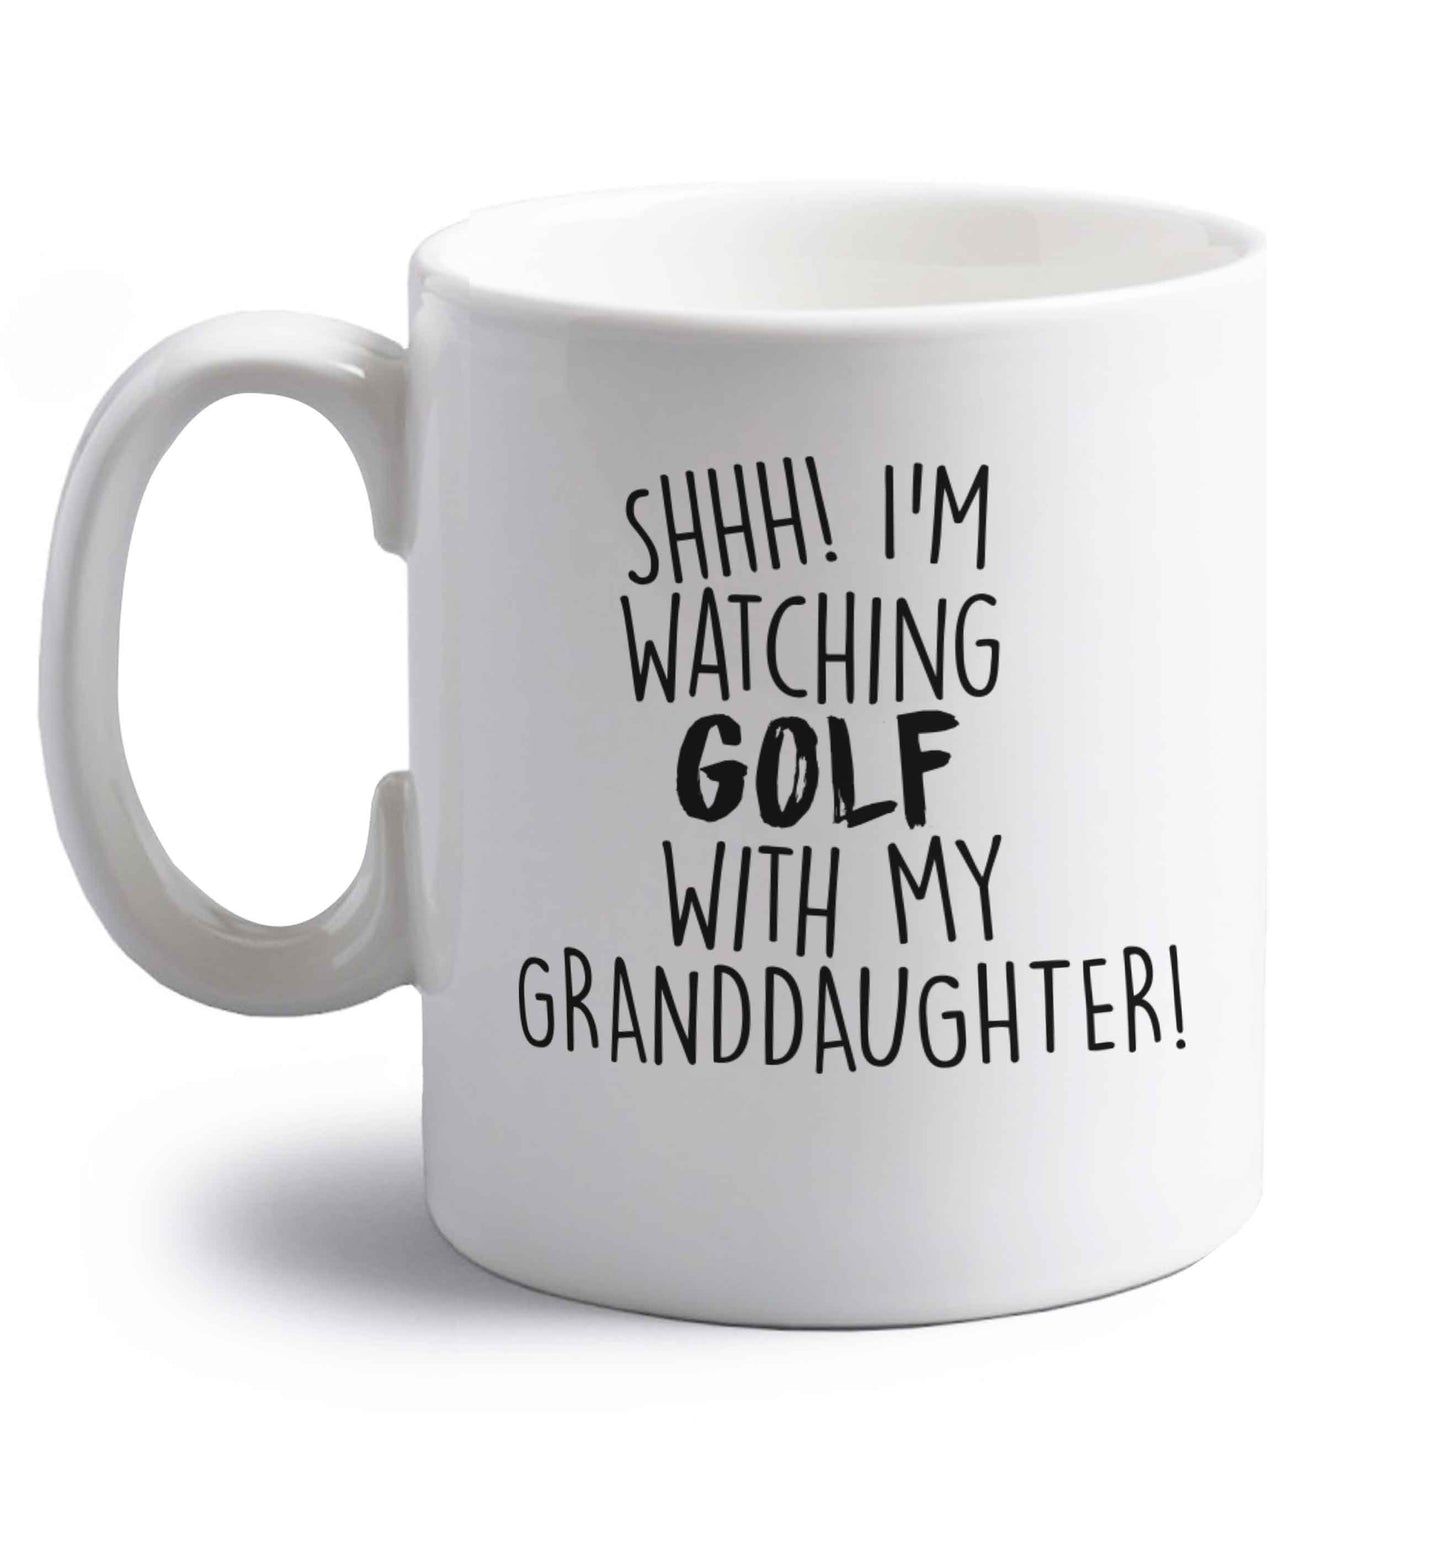 Shh I'm watching golf with my granddaughter right handed white ceramic mug 